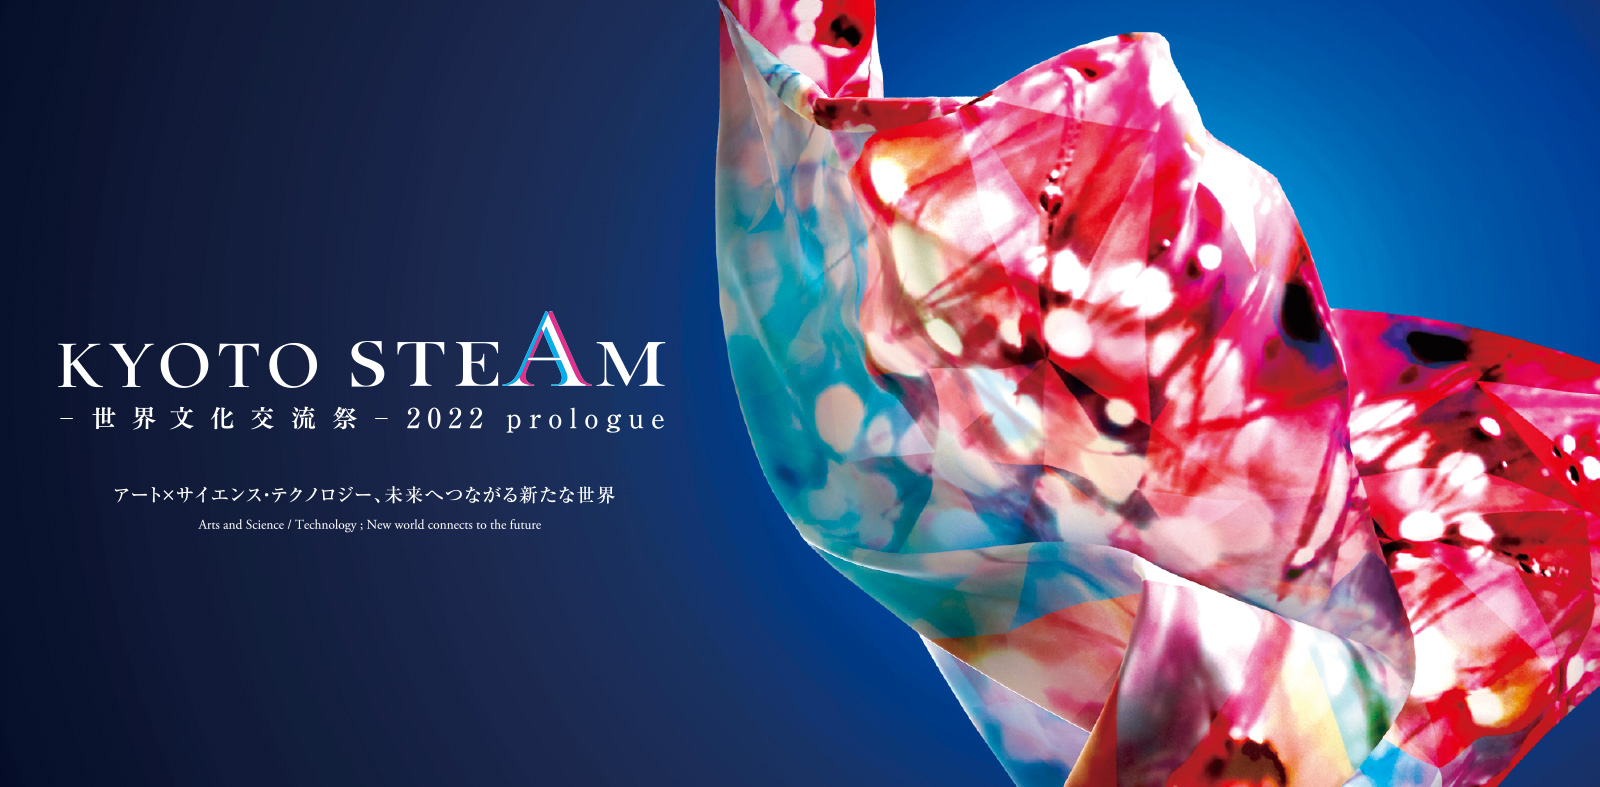 KYOTO STEAM ―世界文化交流祭― アート×サイエンス・テクノロジー、それは未来への序章。 A Festival where Arts and Science / Technology Meet and Merge